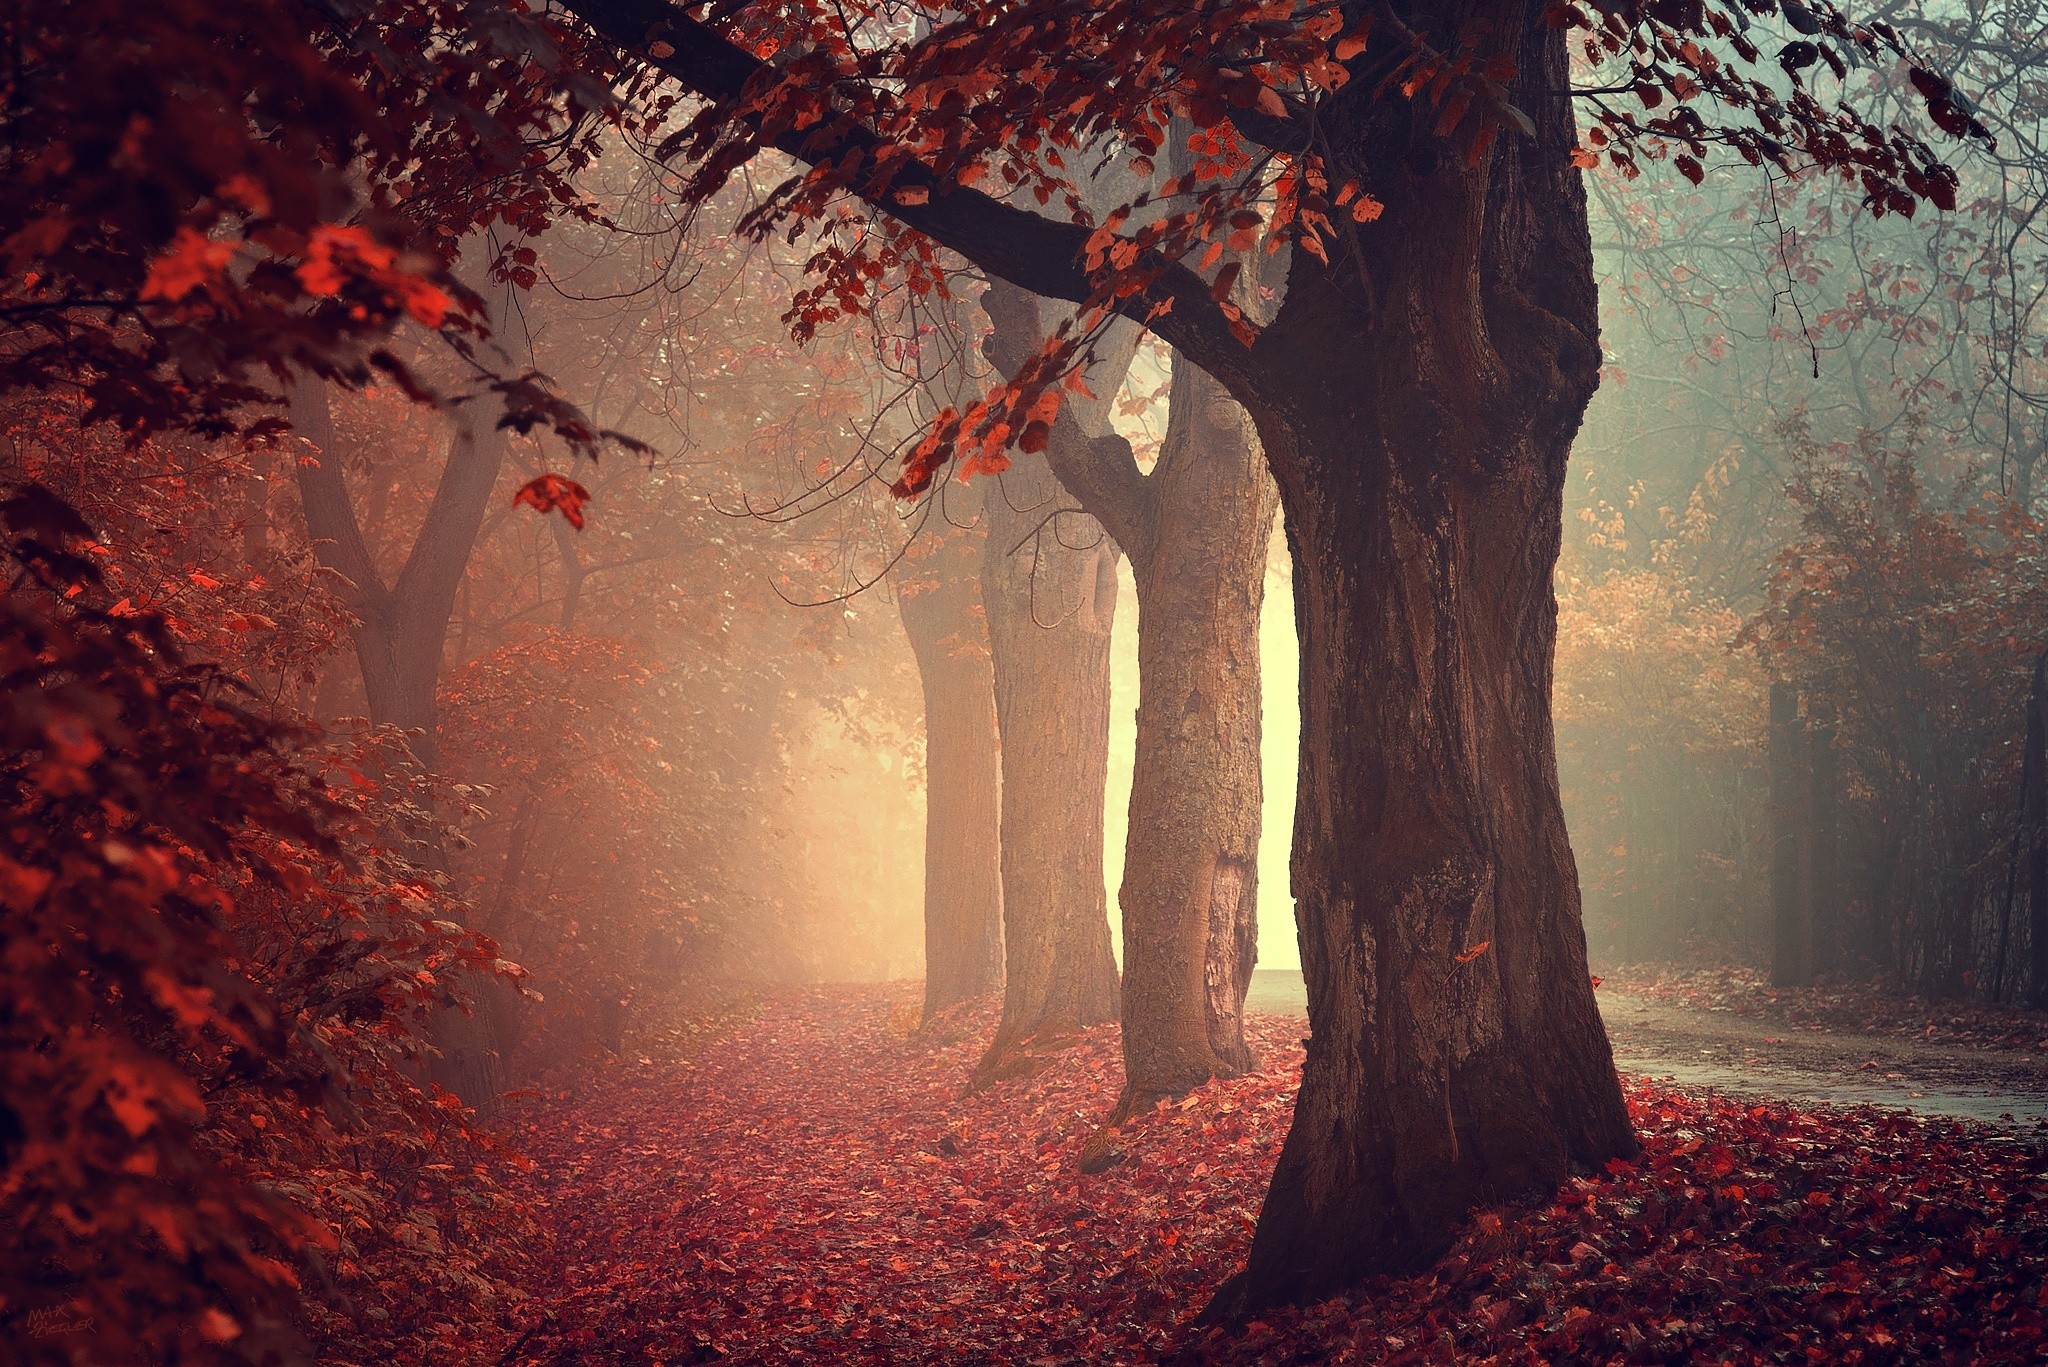 General 2048x1367 trees leaves red path mist red leaves photography calm park outdoors fall fallen leaves